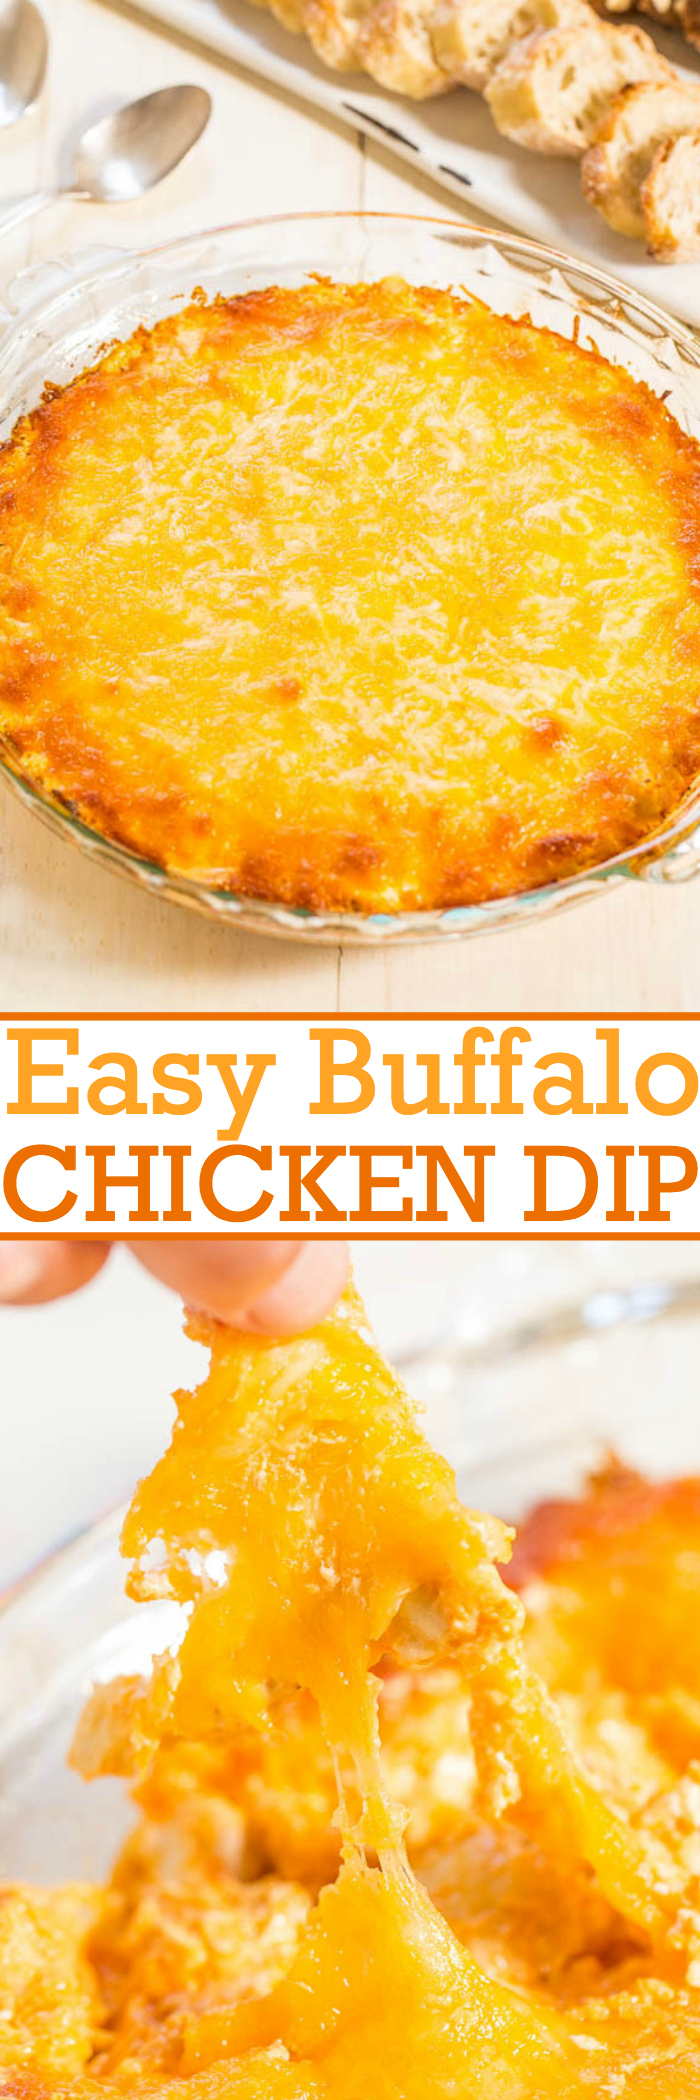 4-Ingredient EASY Buffalo Chicken Dip (No Ranch!) - Averie Cooks